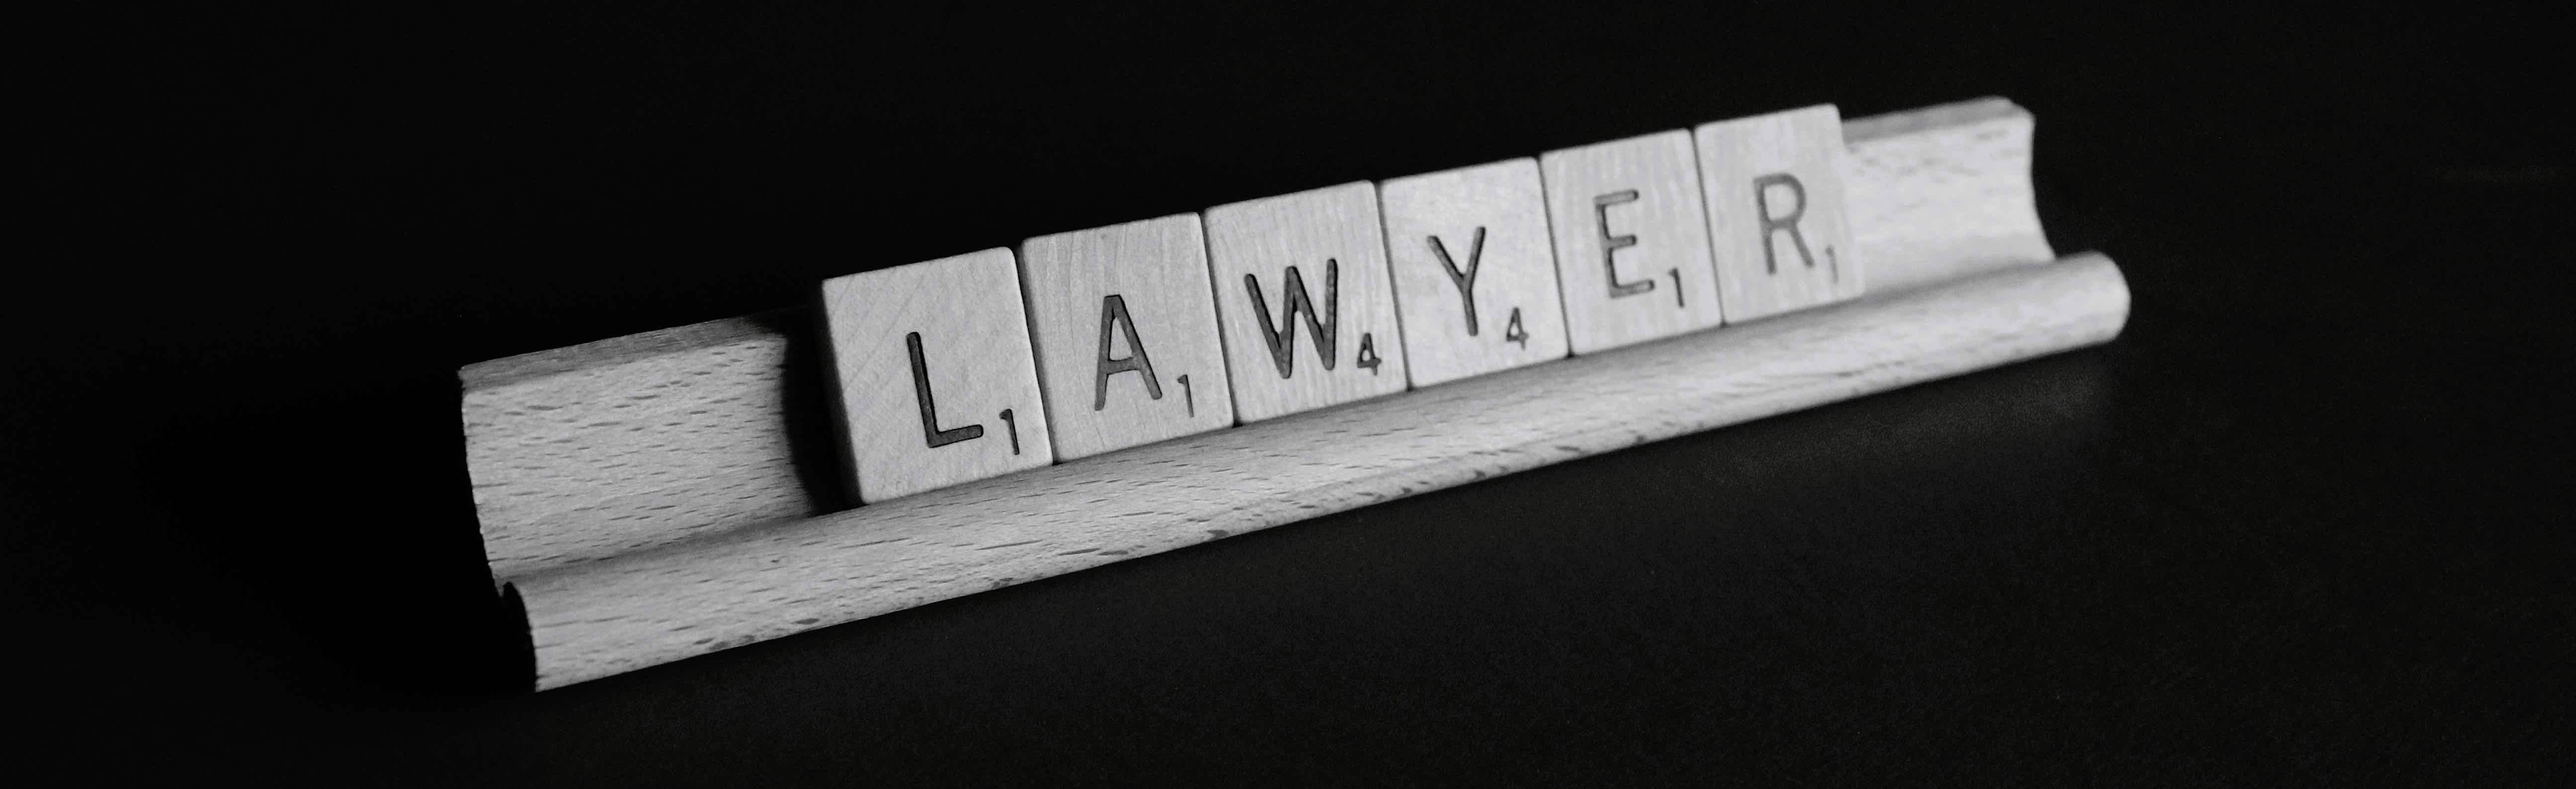 Lawyer spelt out